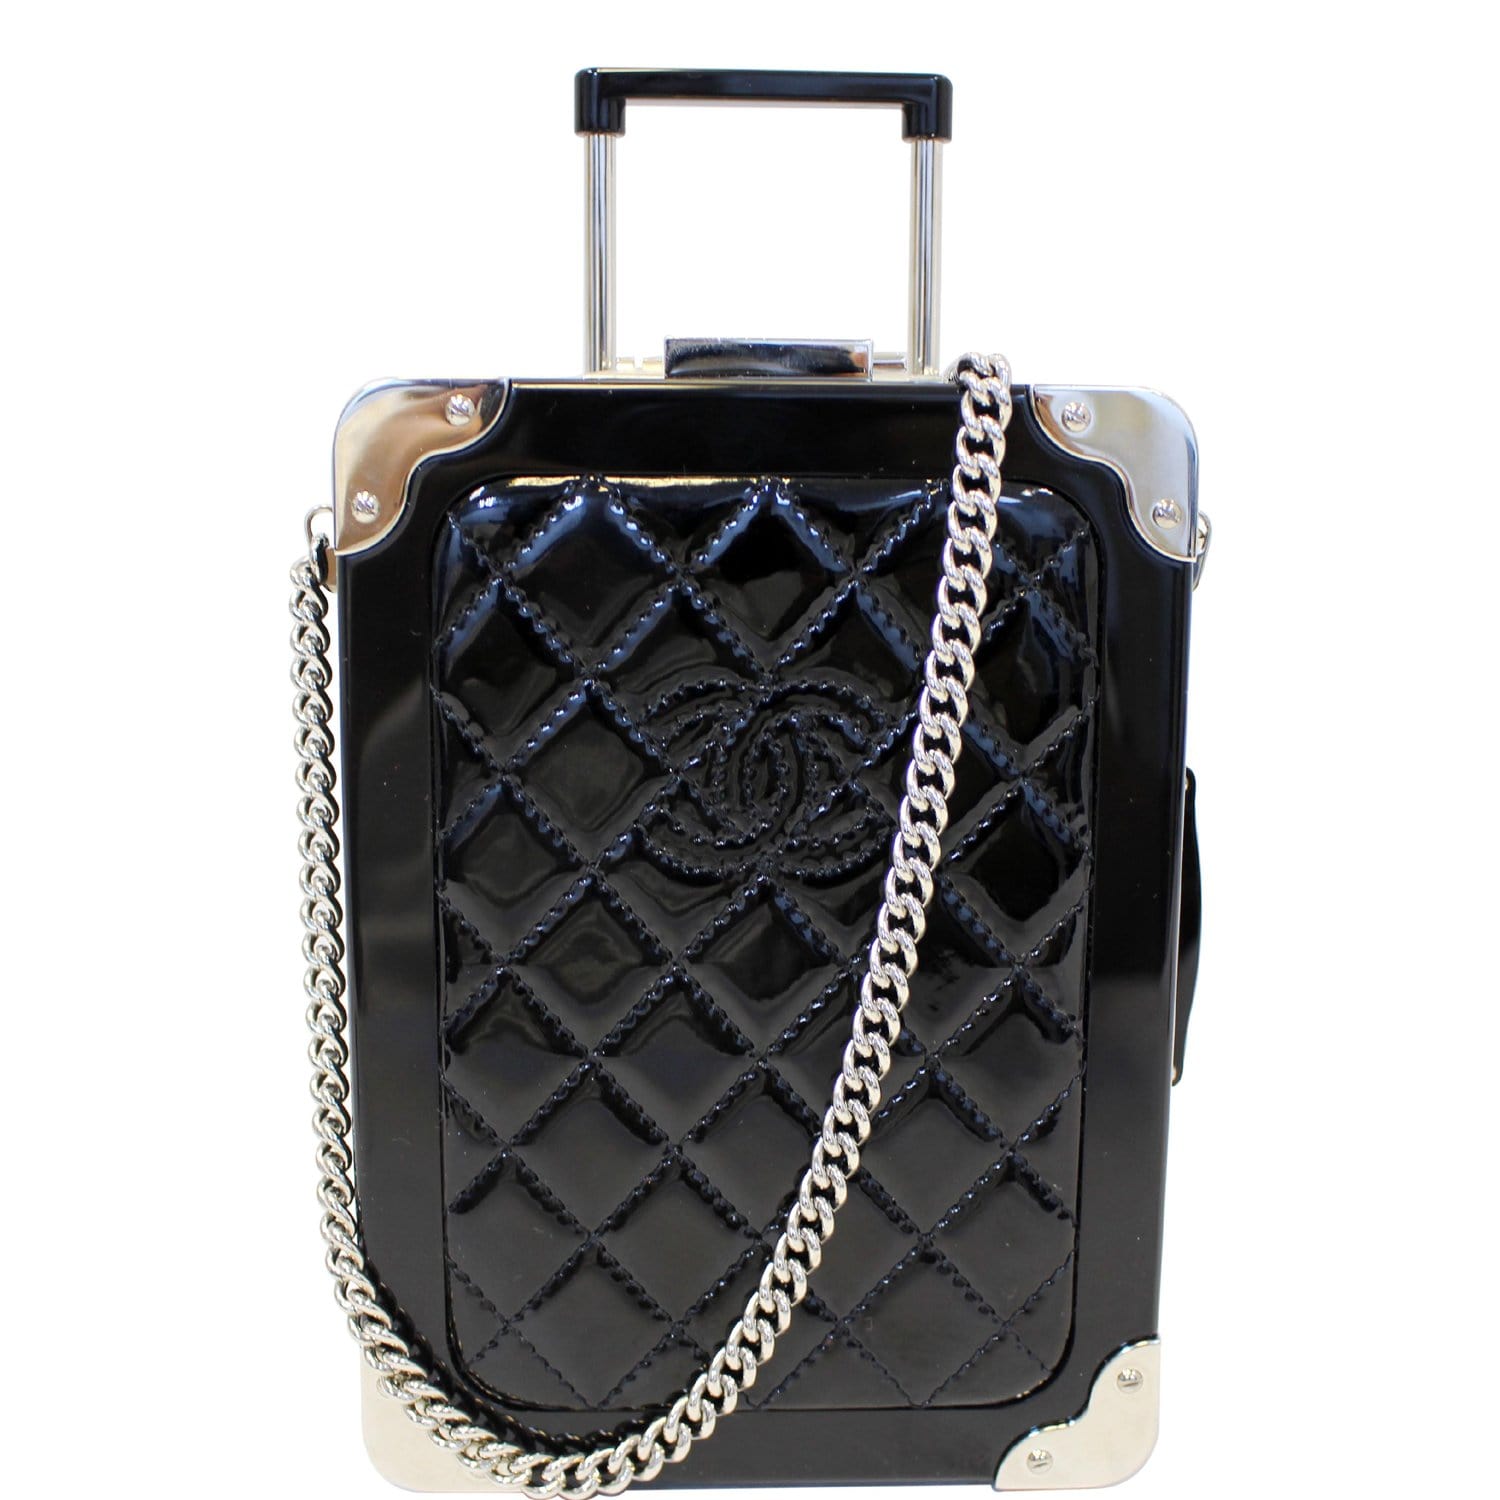 Chanel Limited Edition Black Lucite And Crystal Rocket Ship